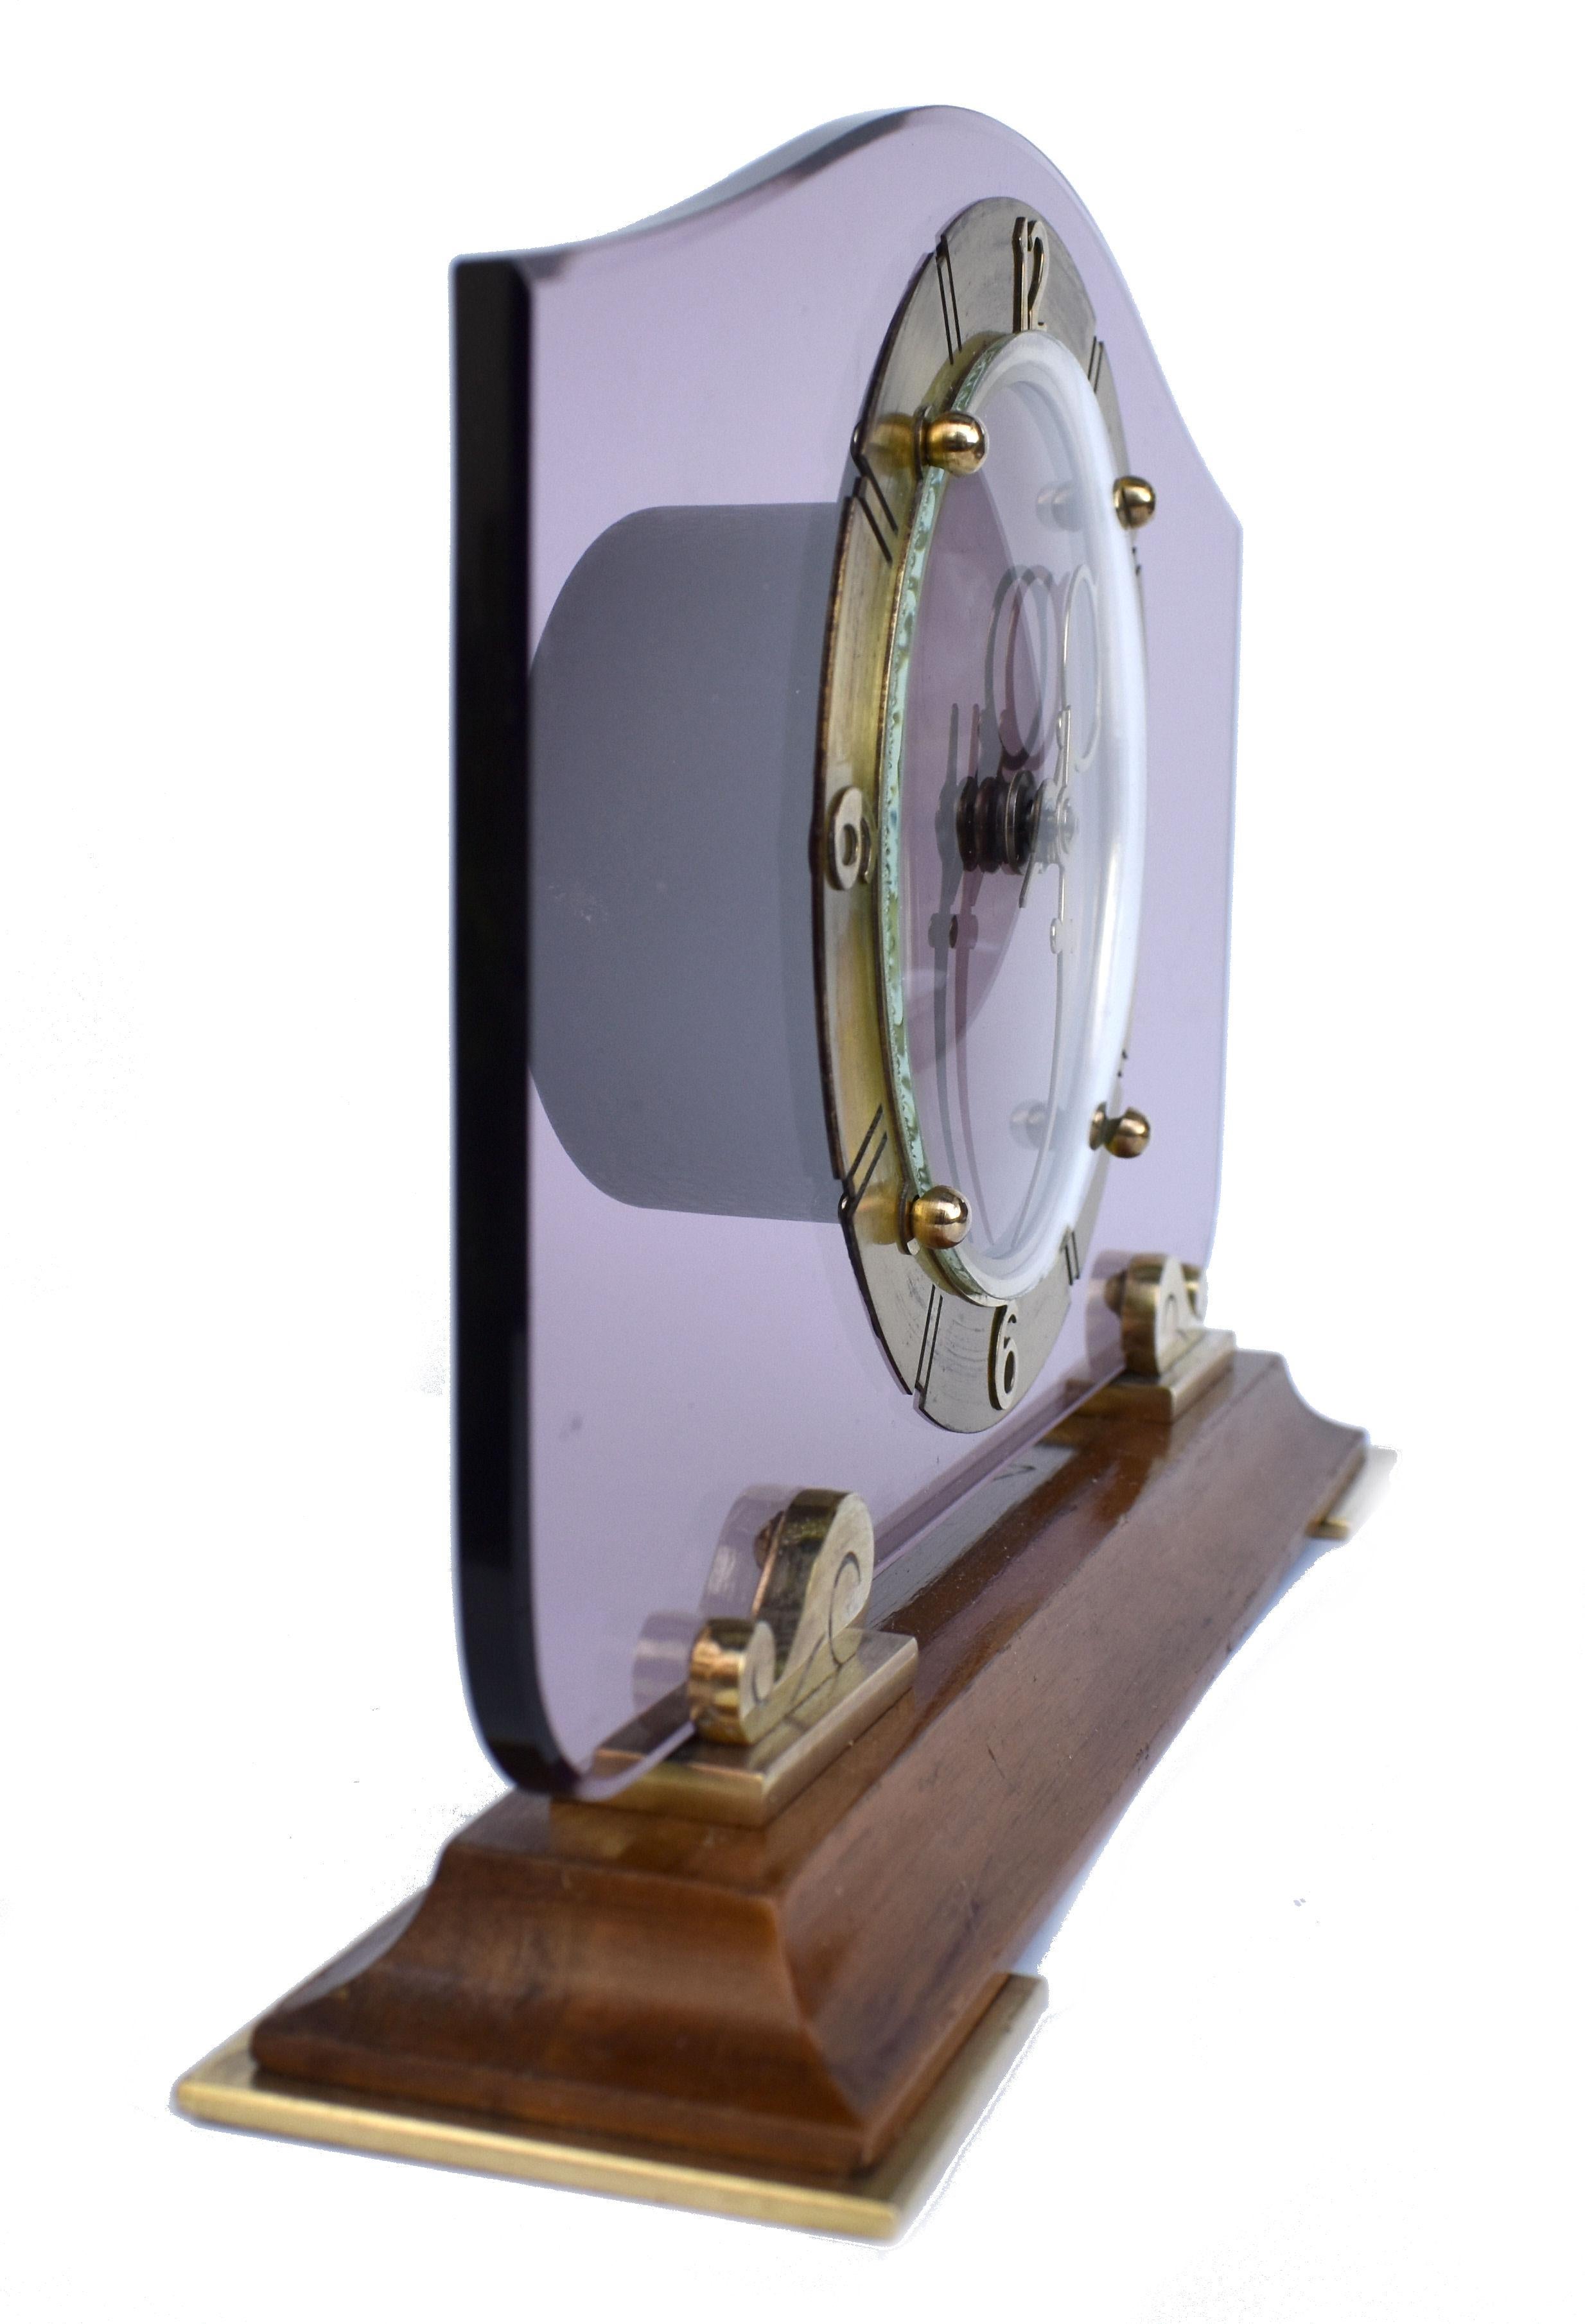 20th Century Art Deco Glass & Mirror 8 Day Mantle Clock, 1930 For Sale